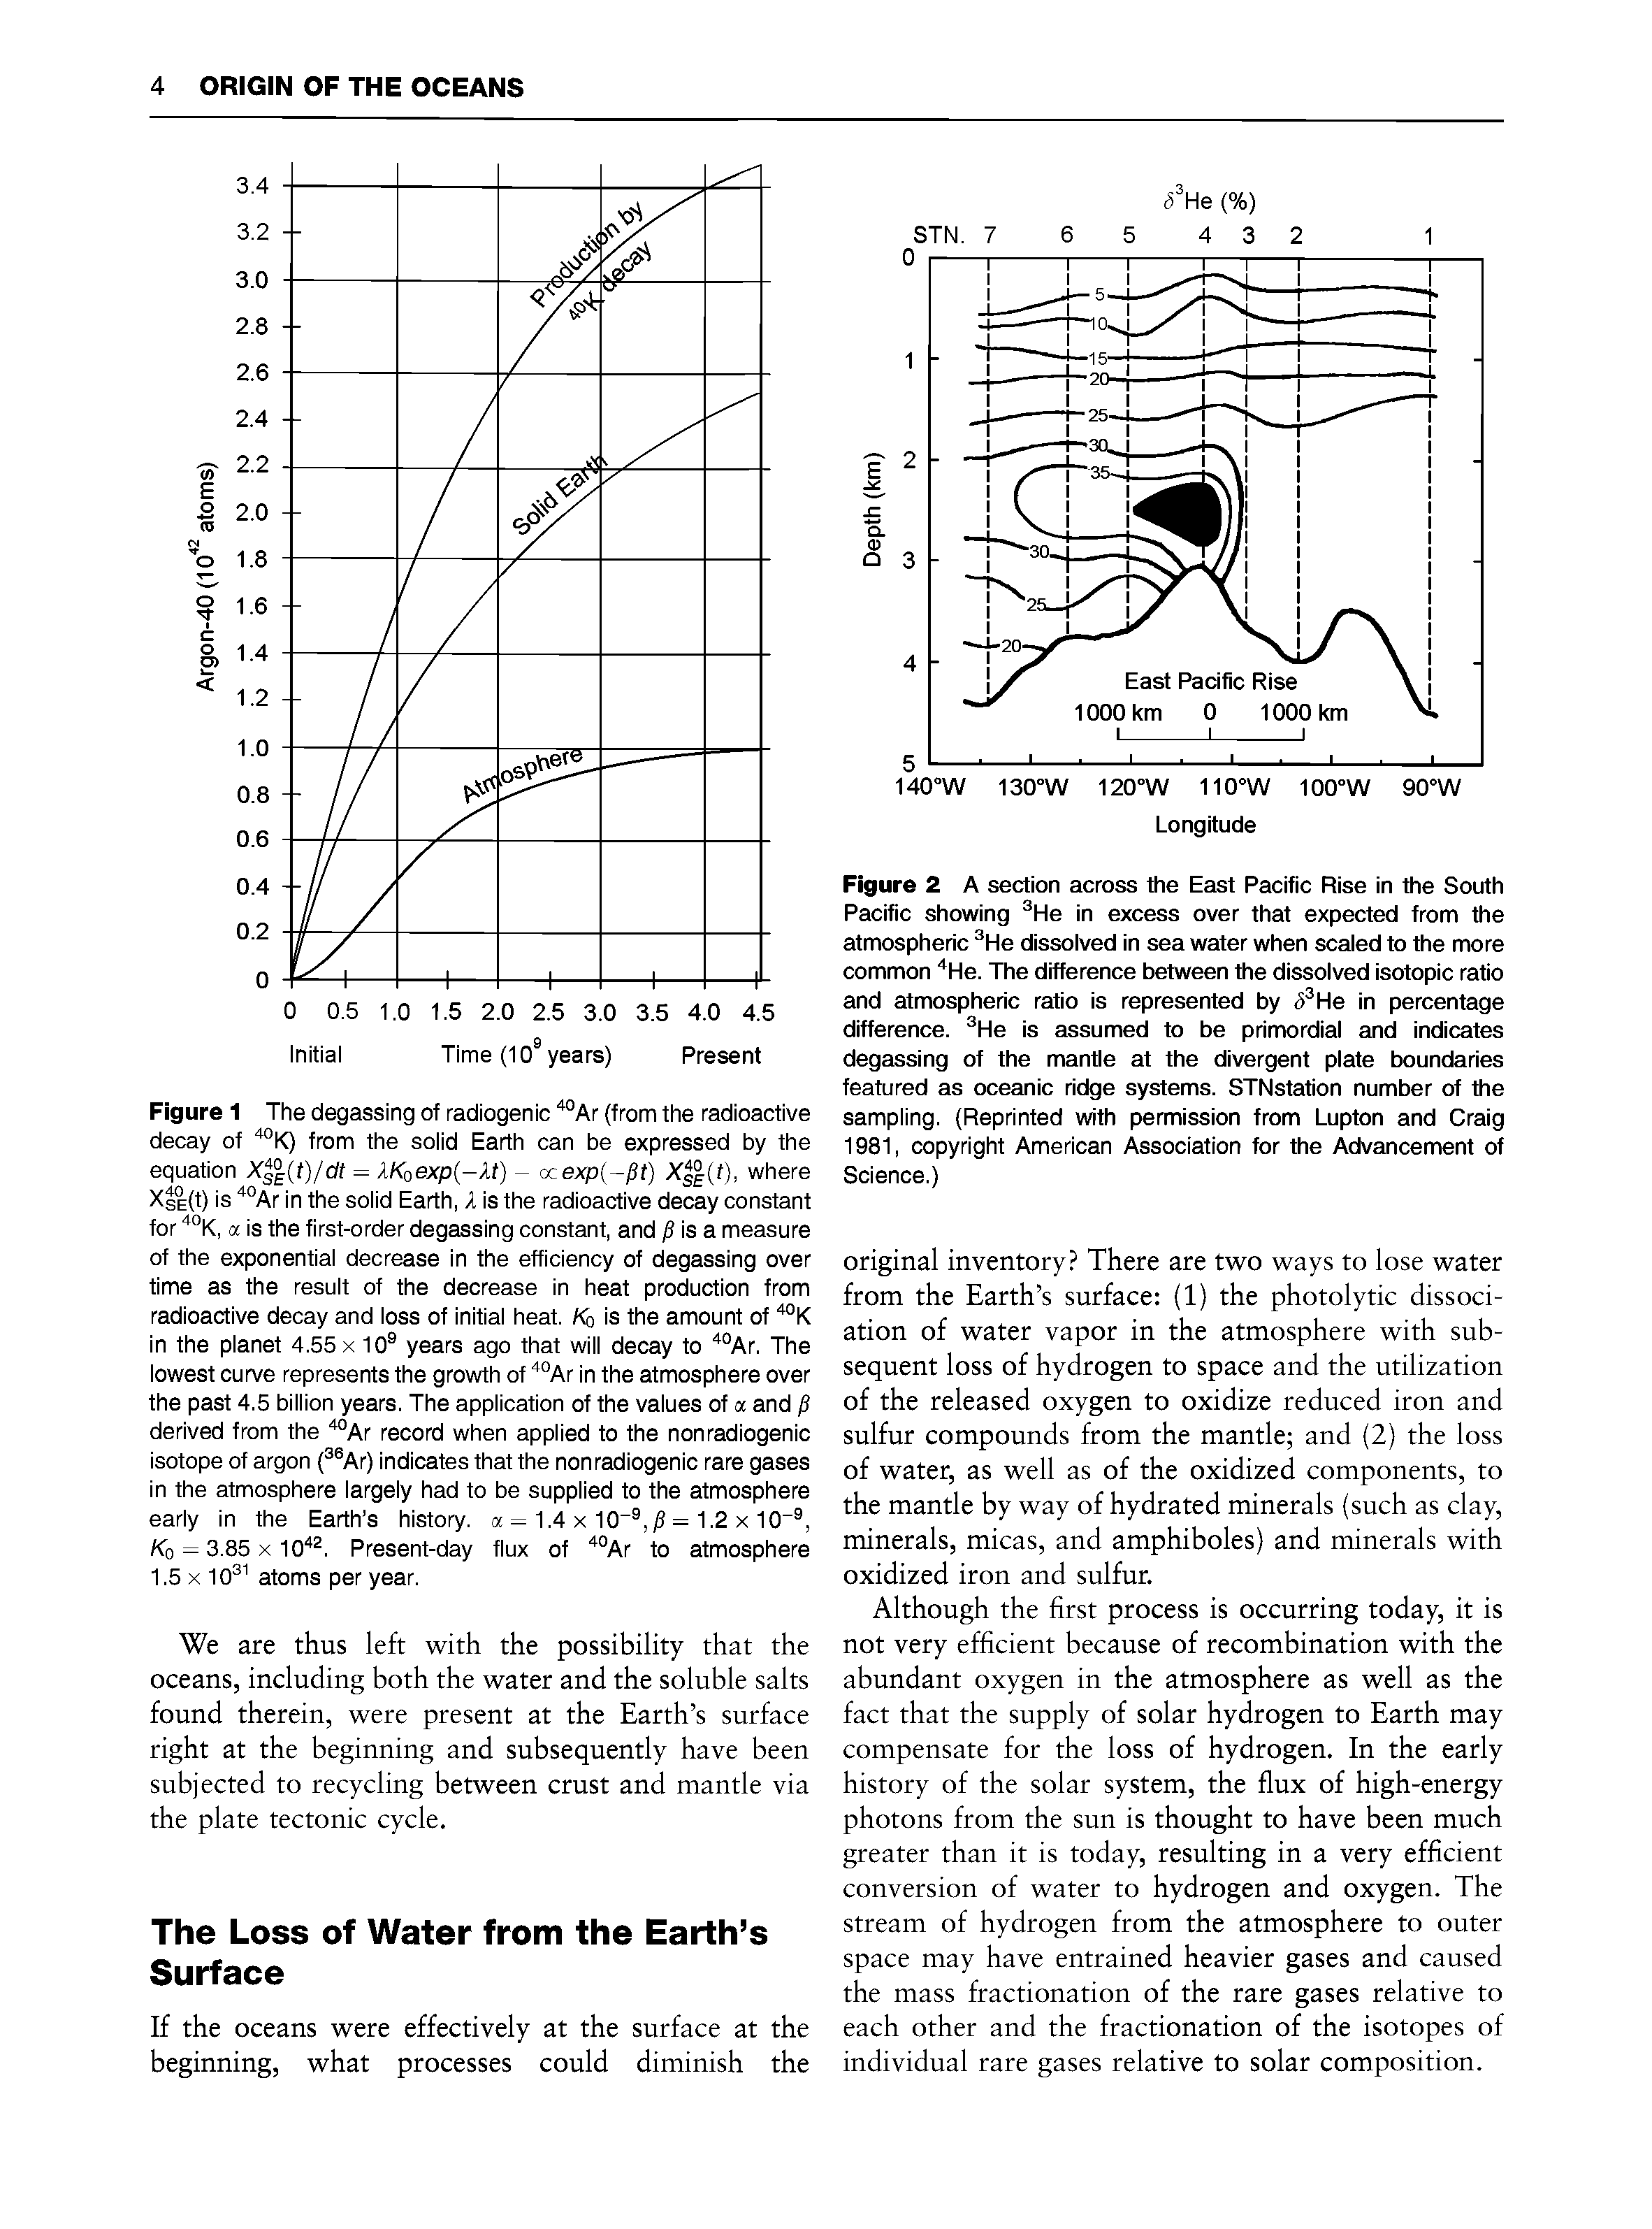 Figure 2 A section across the East Pacific Rise in the South Pacific showing He in excess over that expected from the atmospheric He dissoived in sea water when scaied to the more common He. The difference between the dissolved isotopic ratio and atmospheric ratio is represented by <5 He in percentage difference. He is assumed to be primordial and indicates degassing of the mantle at the divergent plate boundaries featured as oceanic ridge systems. STNstation number of the sampling. (Reprinted with permission from Lupton and Craig 1981, copyright American Association for the Advancement of Science.)...